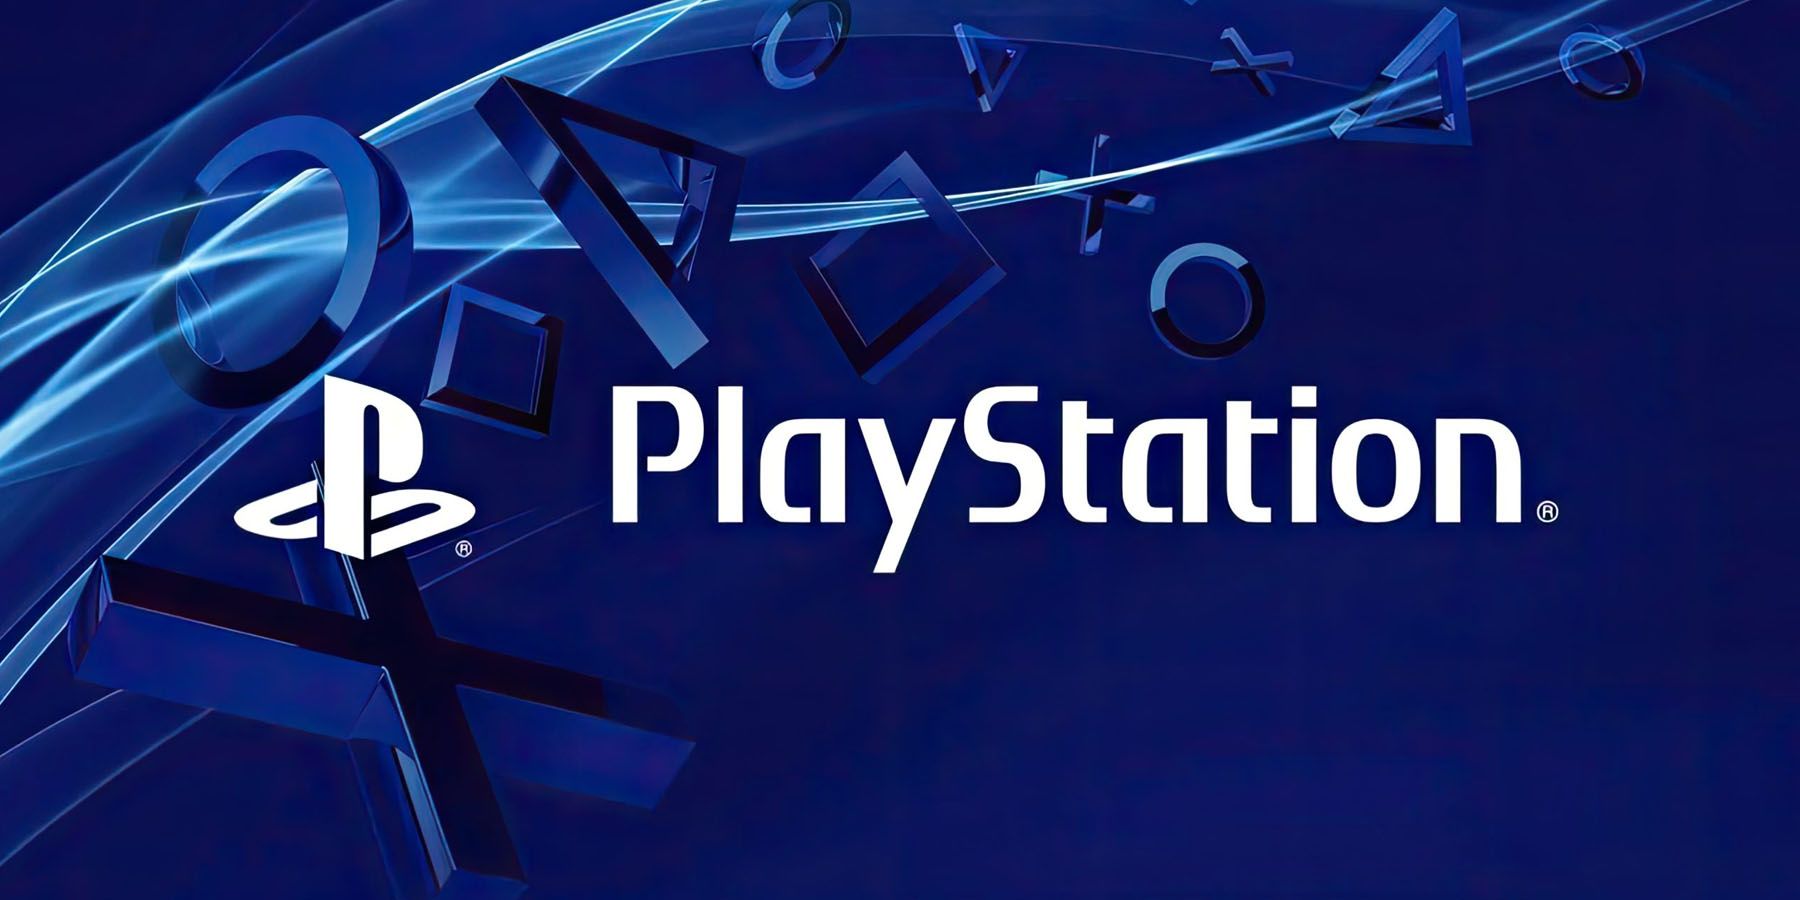 A white PlayStation logo set against a blue background with PlayStation button symbols behind it.